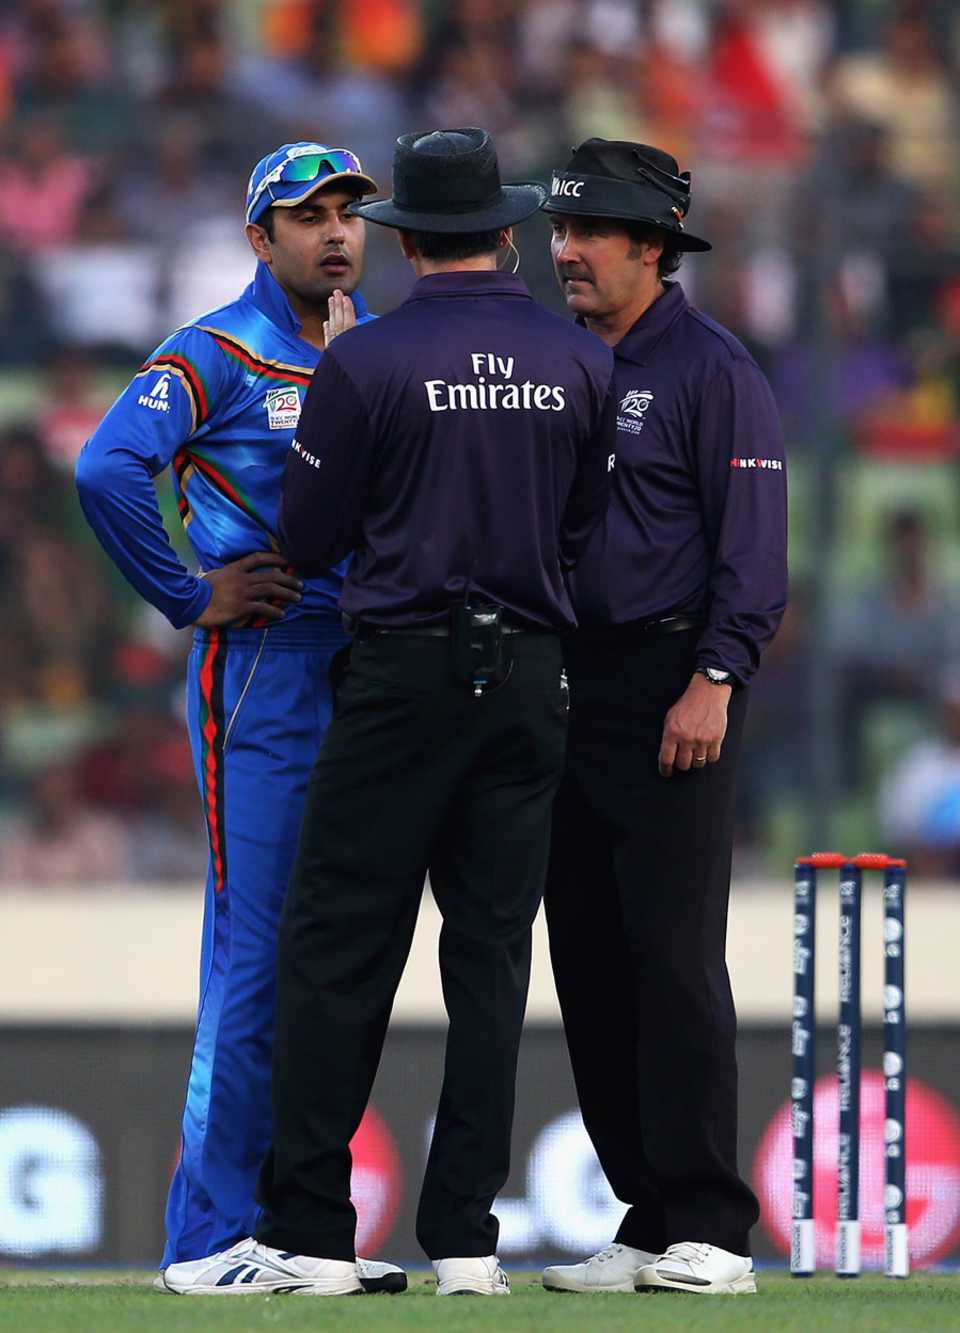 The umpires have a word with Mohammad Nabi after things got heated on the field